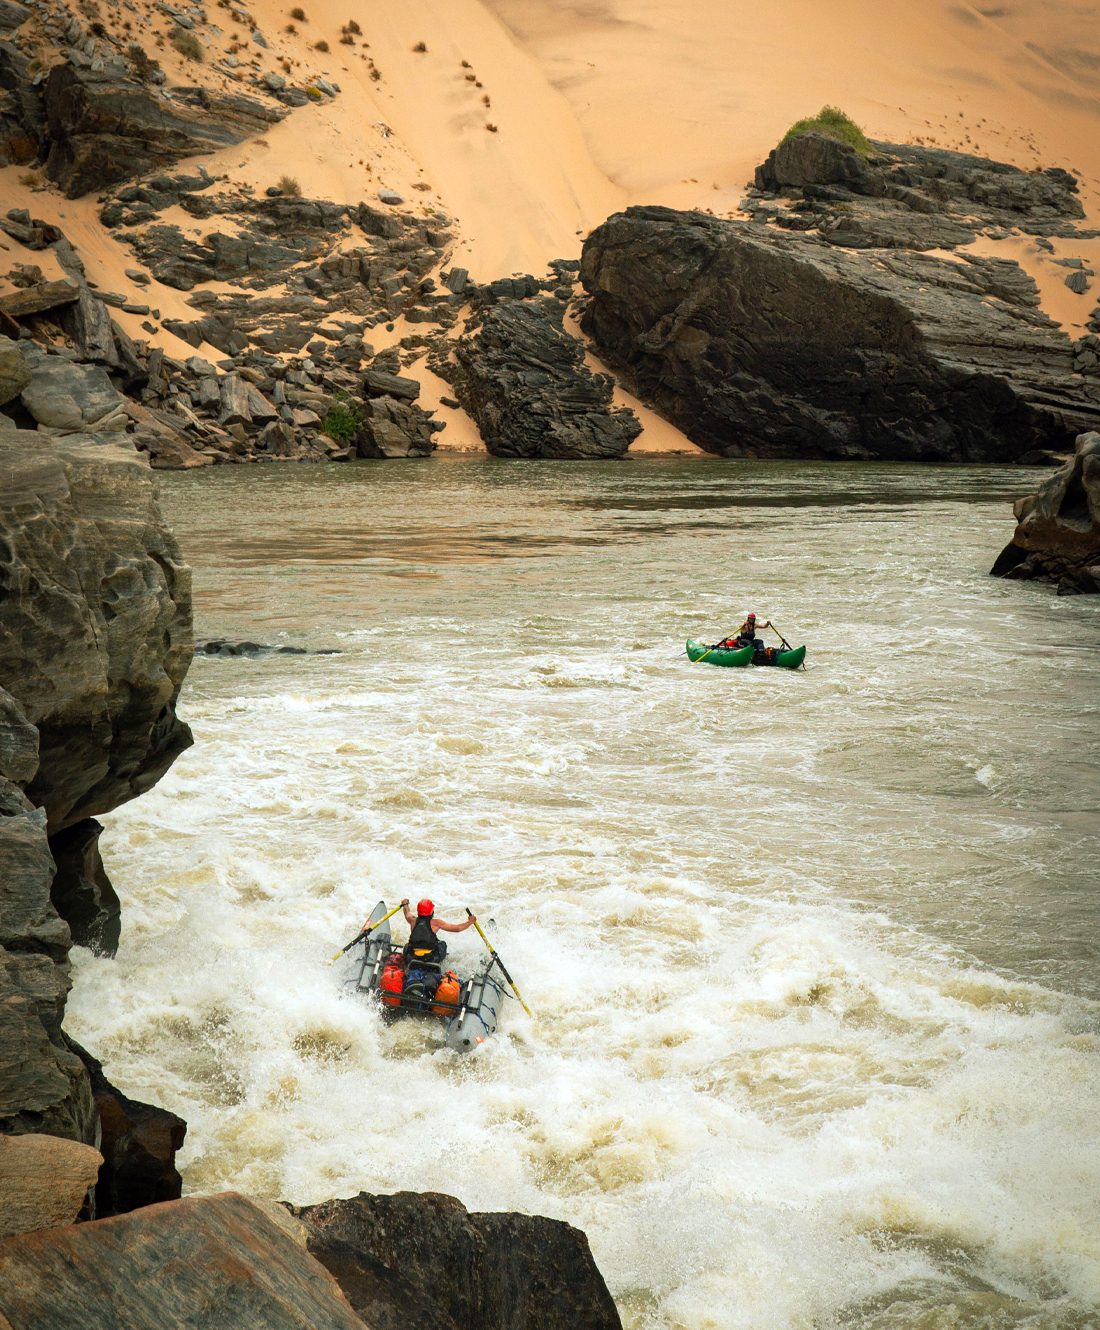 Rafting Expedition in Africa